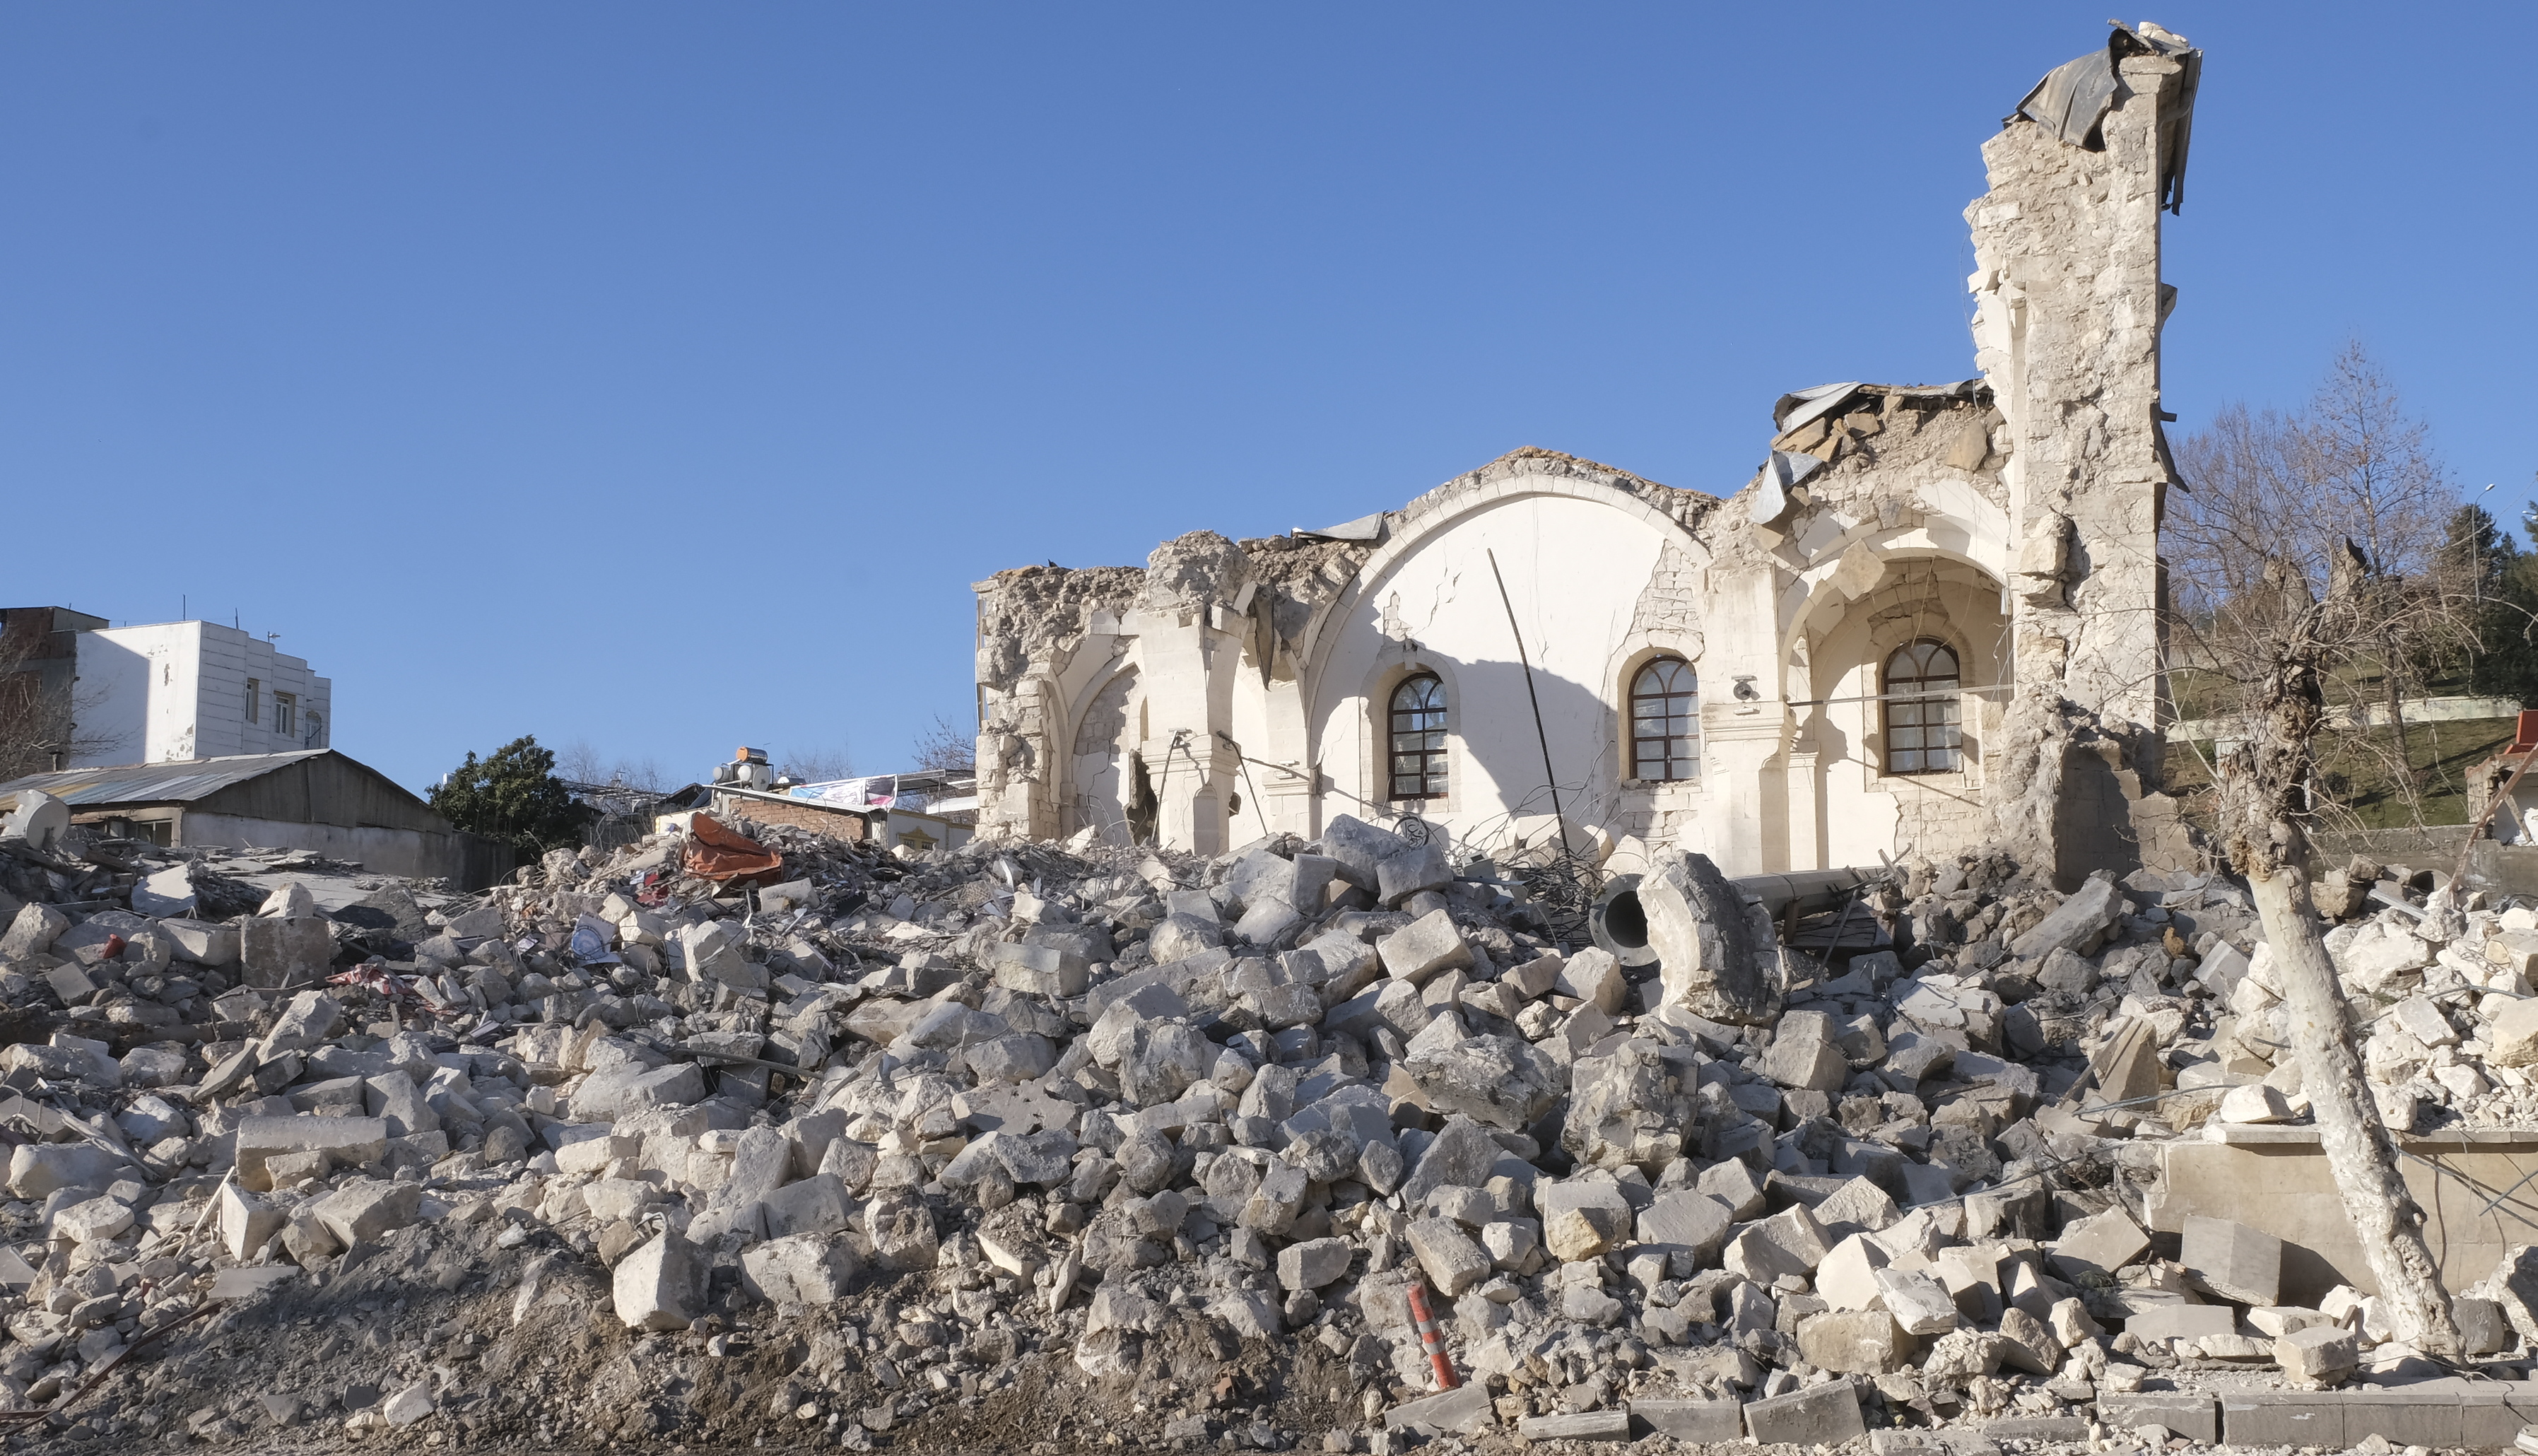 The Adiyaman Ulu Mosque, which was built in 1863 and is located in the city centre, was completely destroyed by the 7.8 magnitude earthquake (MEE)